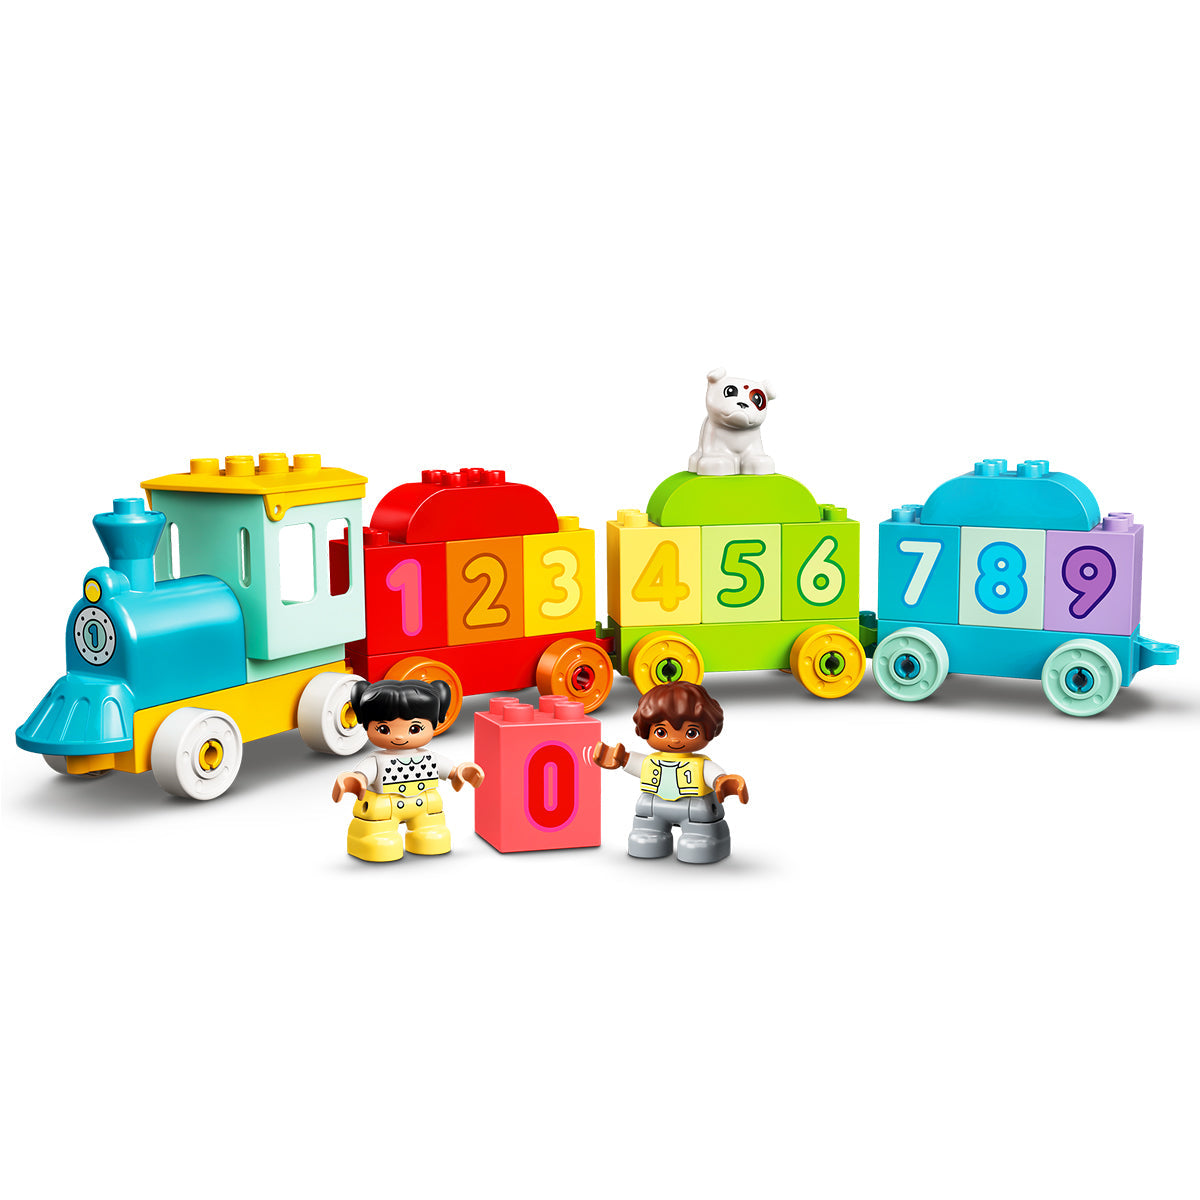 LEGO DUPLO - My First Number Train - Learn To Count 10954